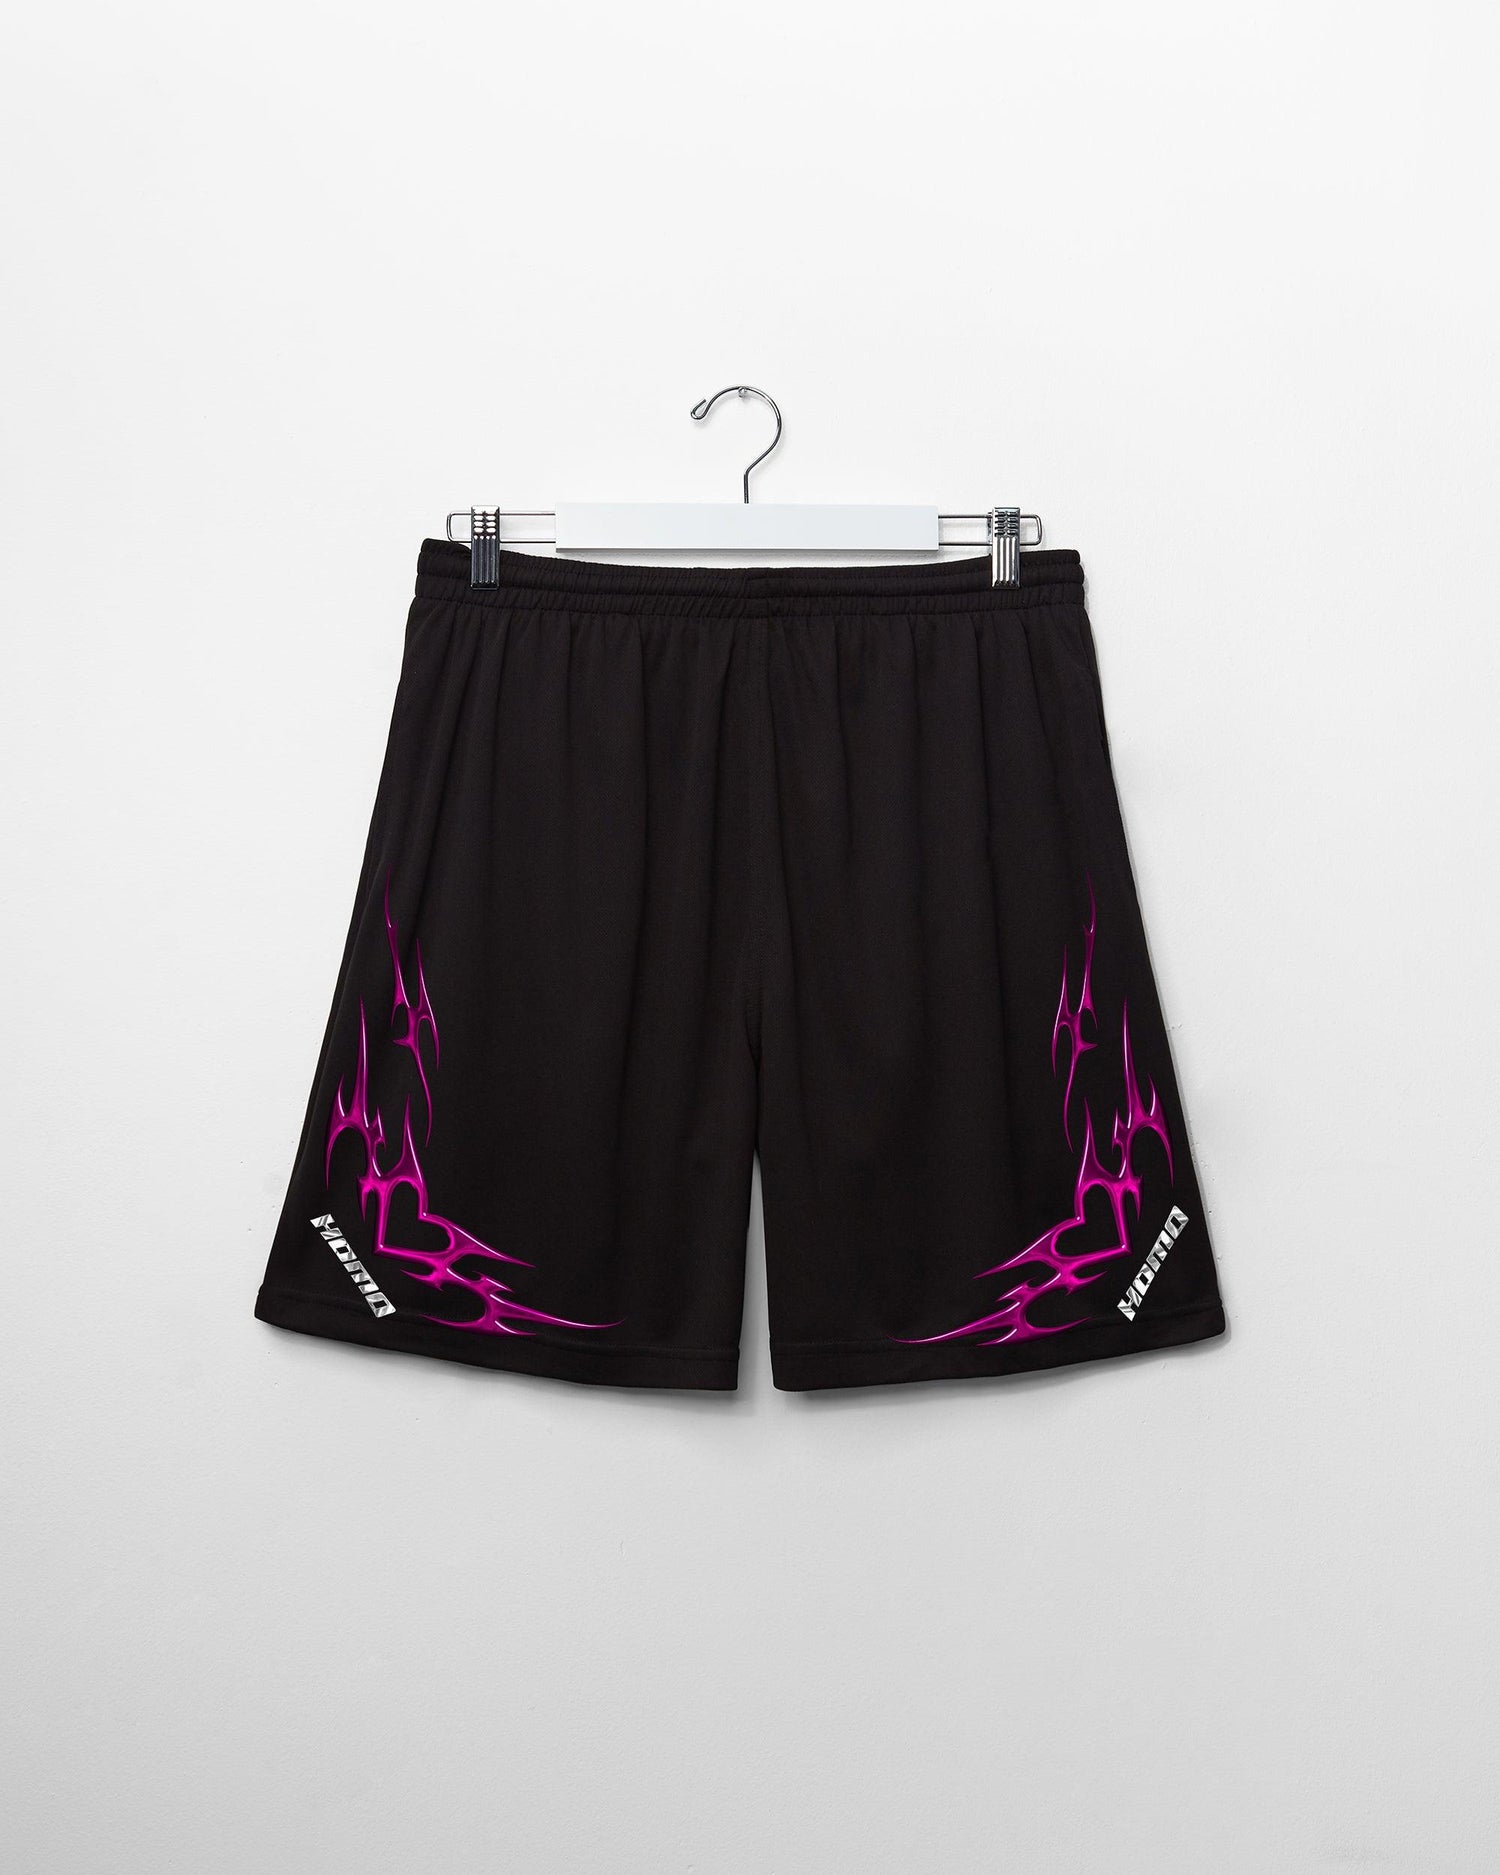 Double Pack - Chrome Y2K: HOMO, silver and pink on black- tank and basket ball shorts - Full outfit. - HOMOLONDON